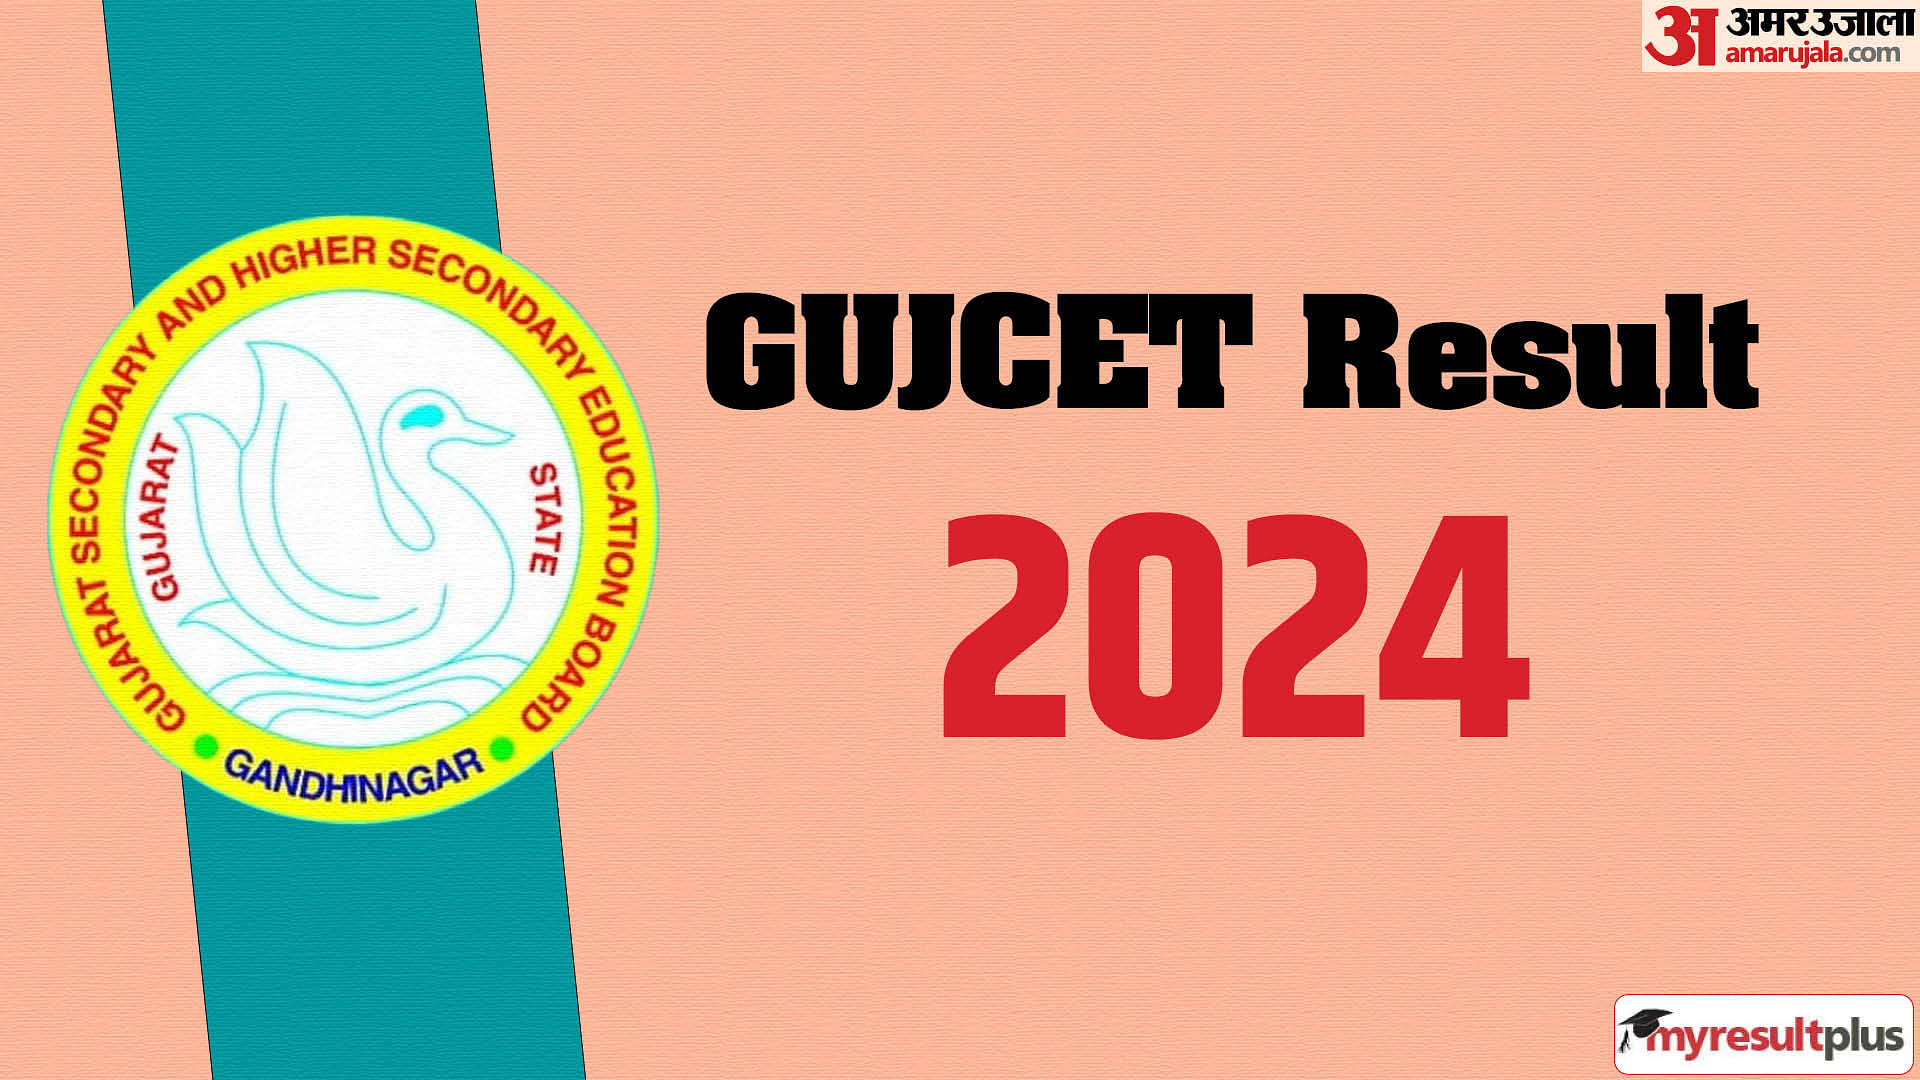 GUJCET Result 2024 expected soon, Read about the passing criteria and steps to download here